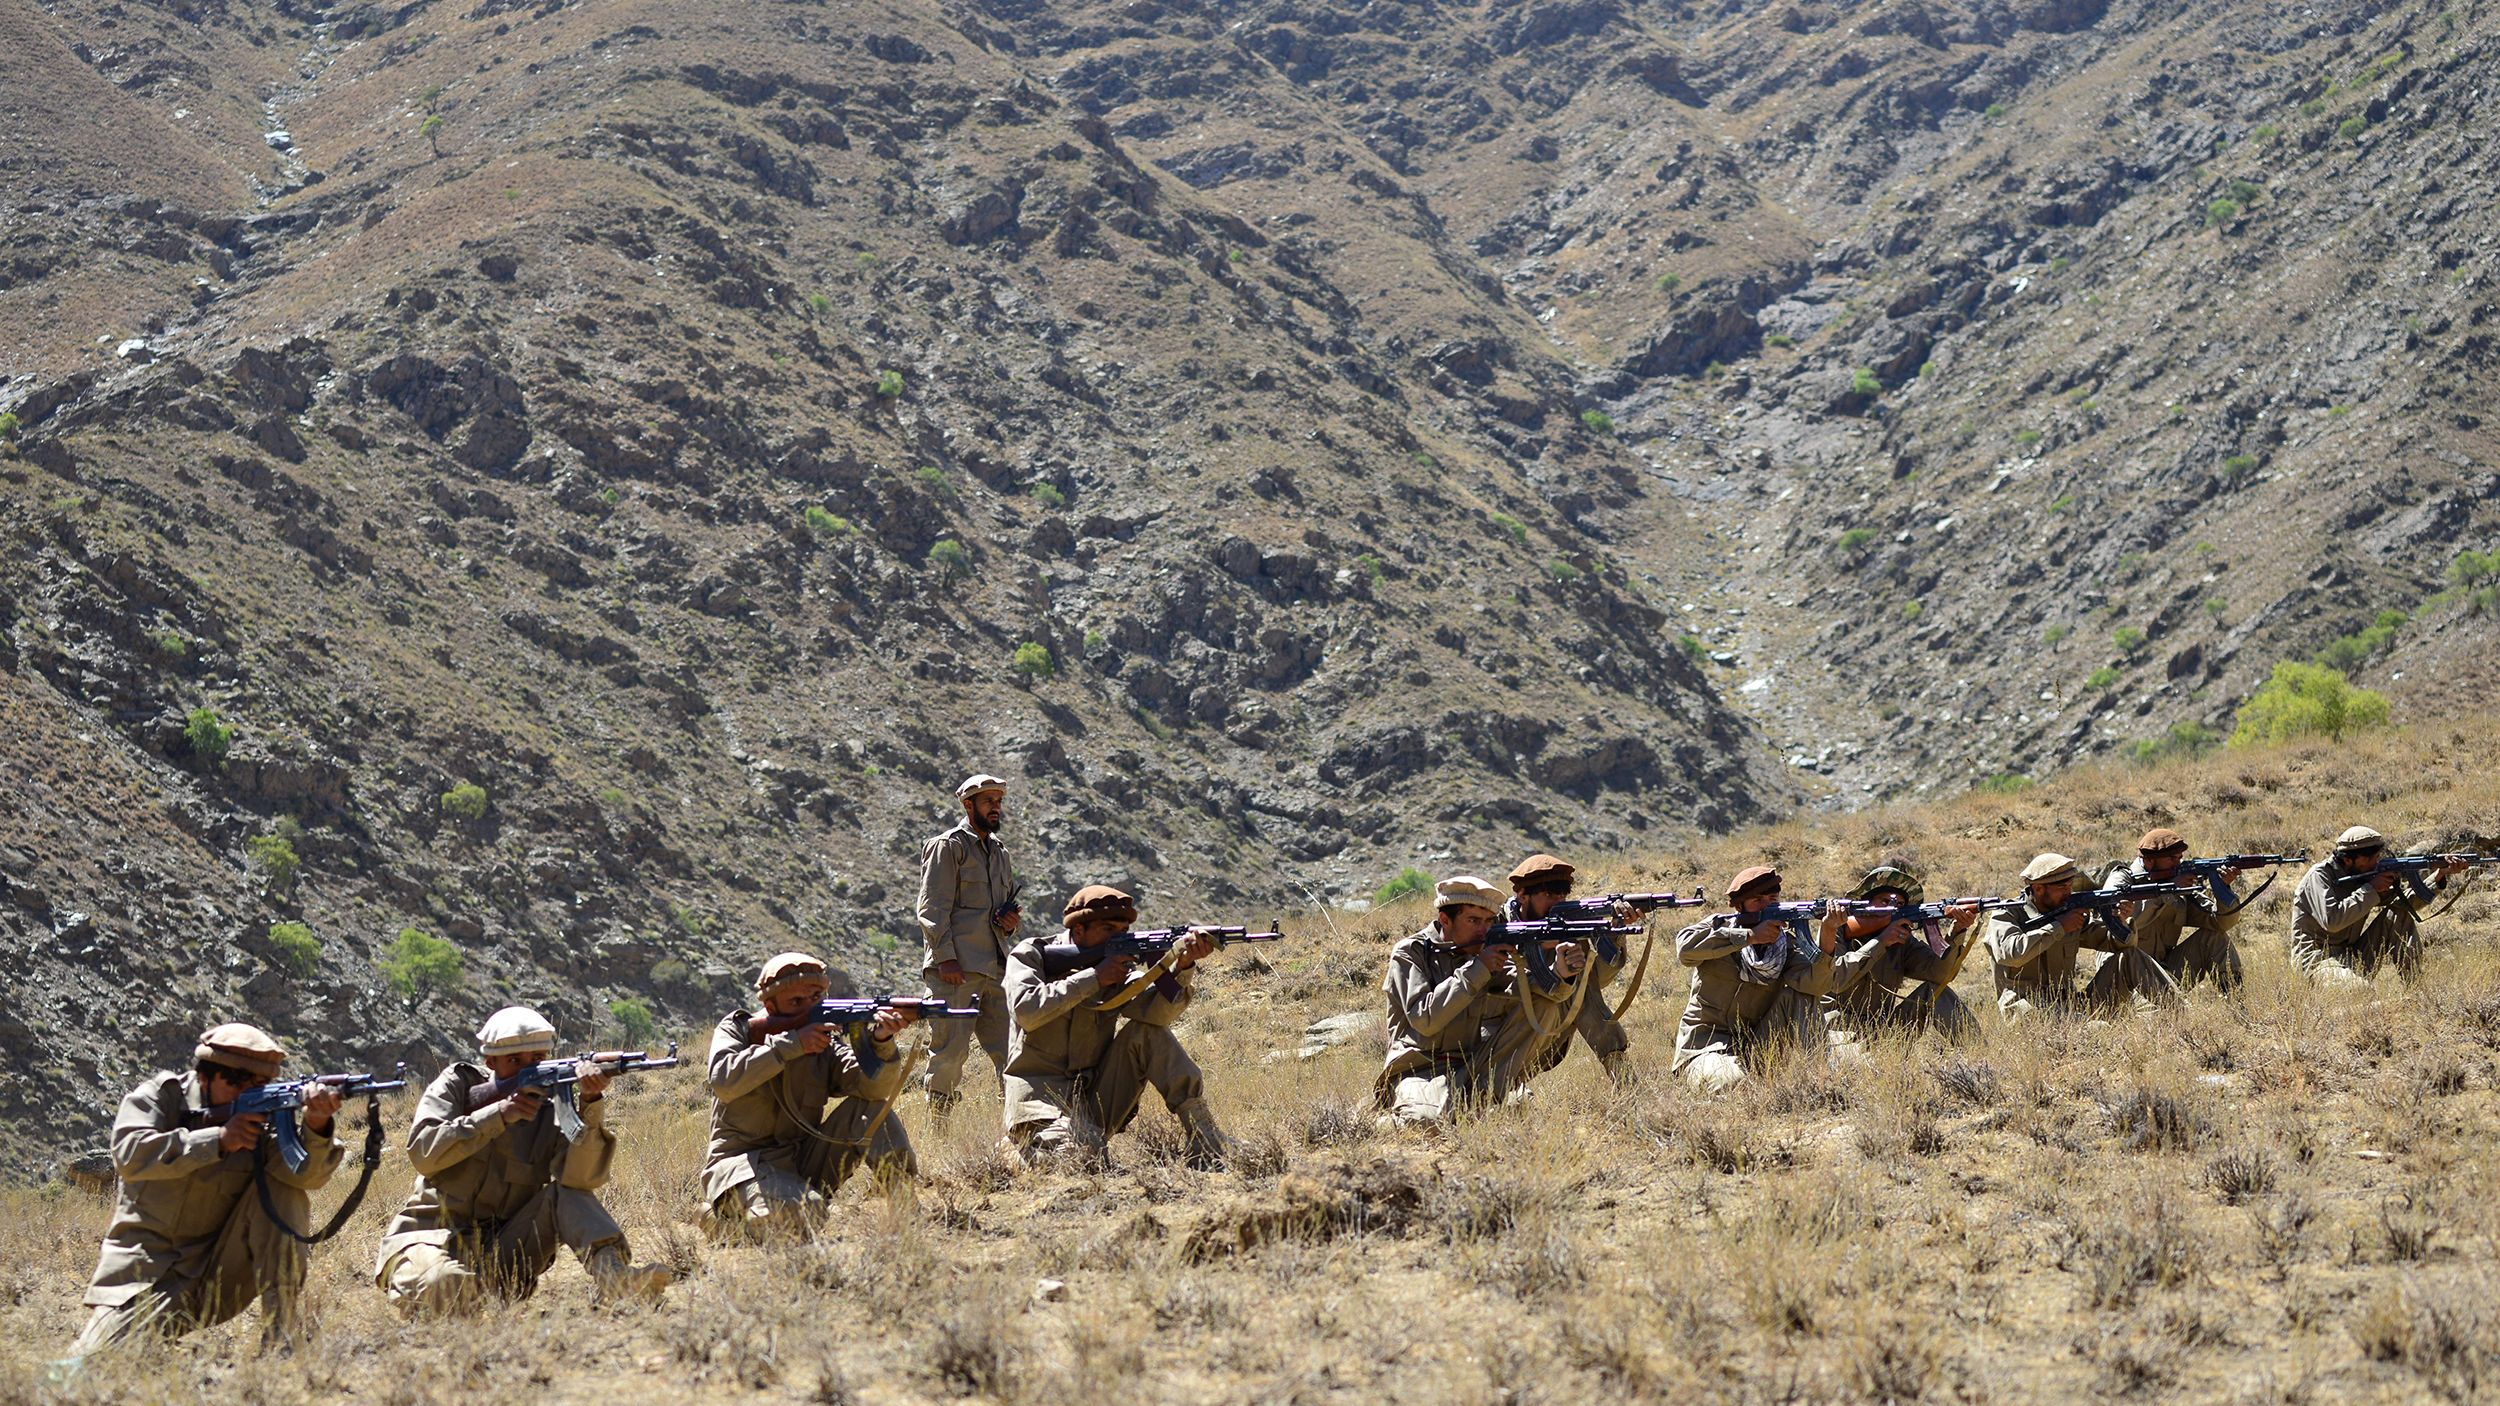 Afghan resistance movement and anti-Taliban forces conduct military training at the Malimah area of Dara district in Panjshir province on September 2.